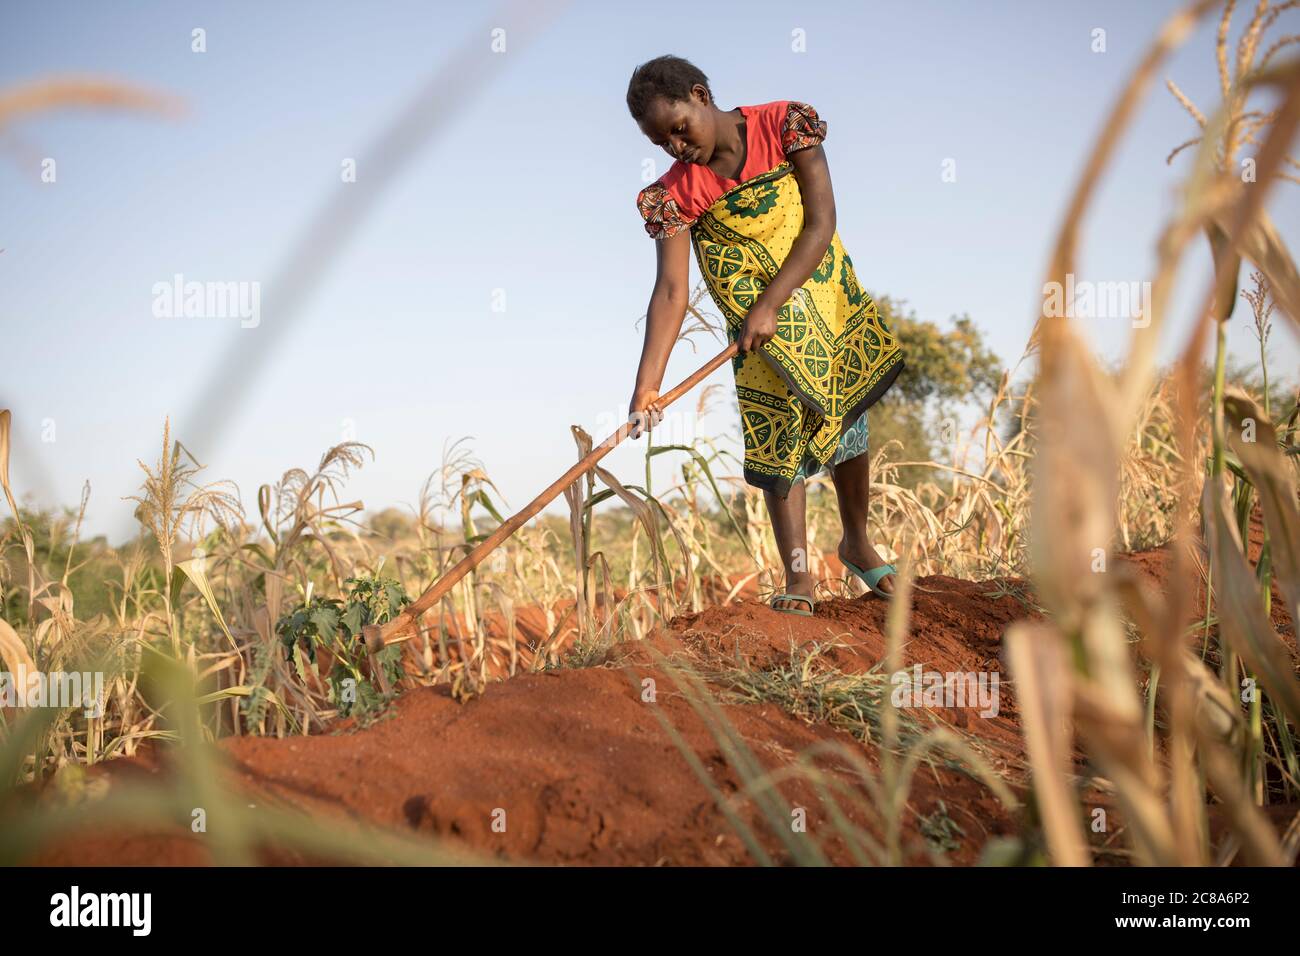 Farmers affected by climate change use mound & zai pit techniques to channel water into compost and nutrient rich pits where crops are more productive. Stock Photo